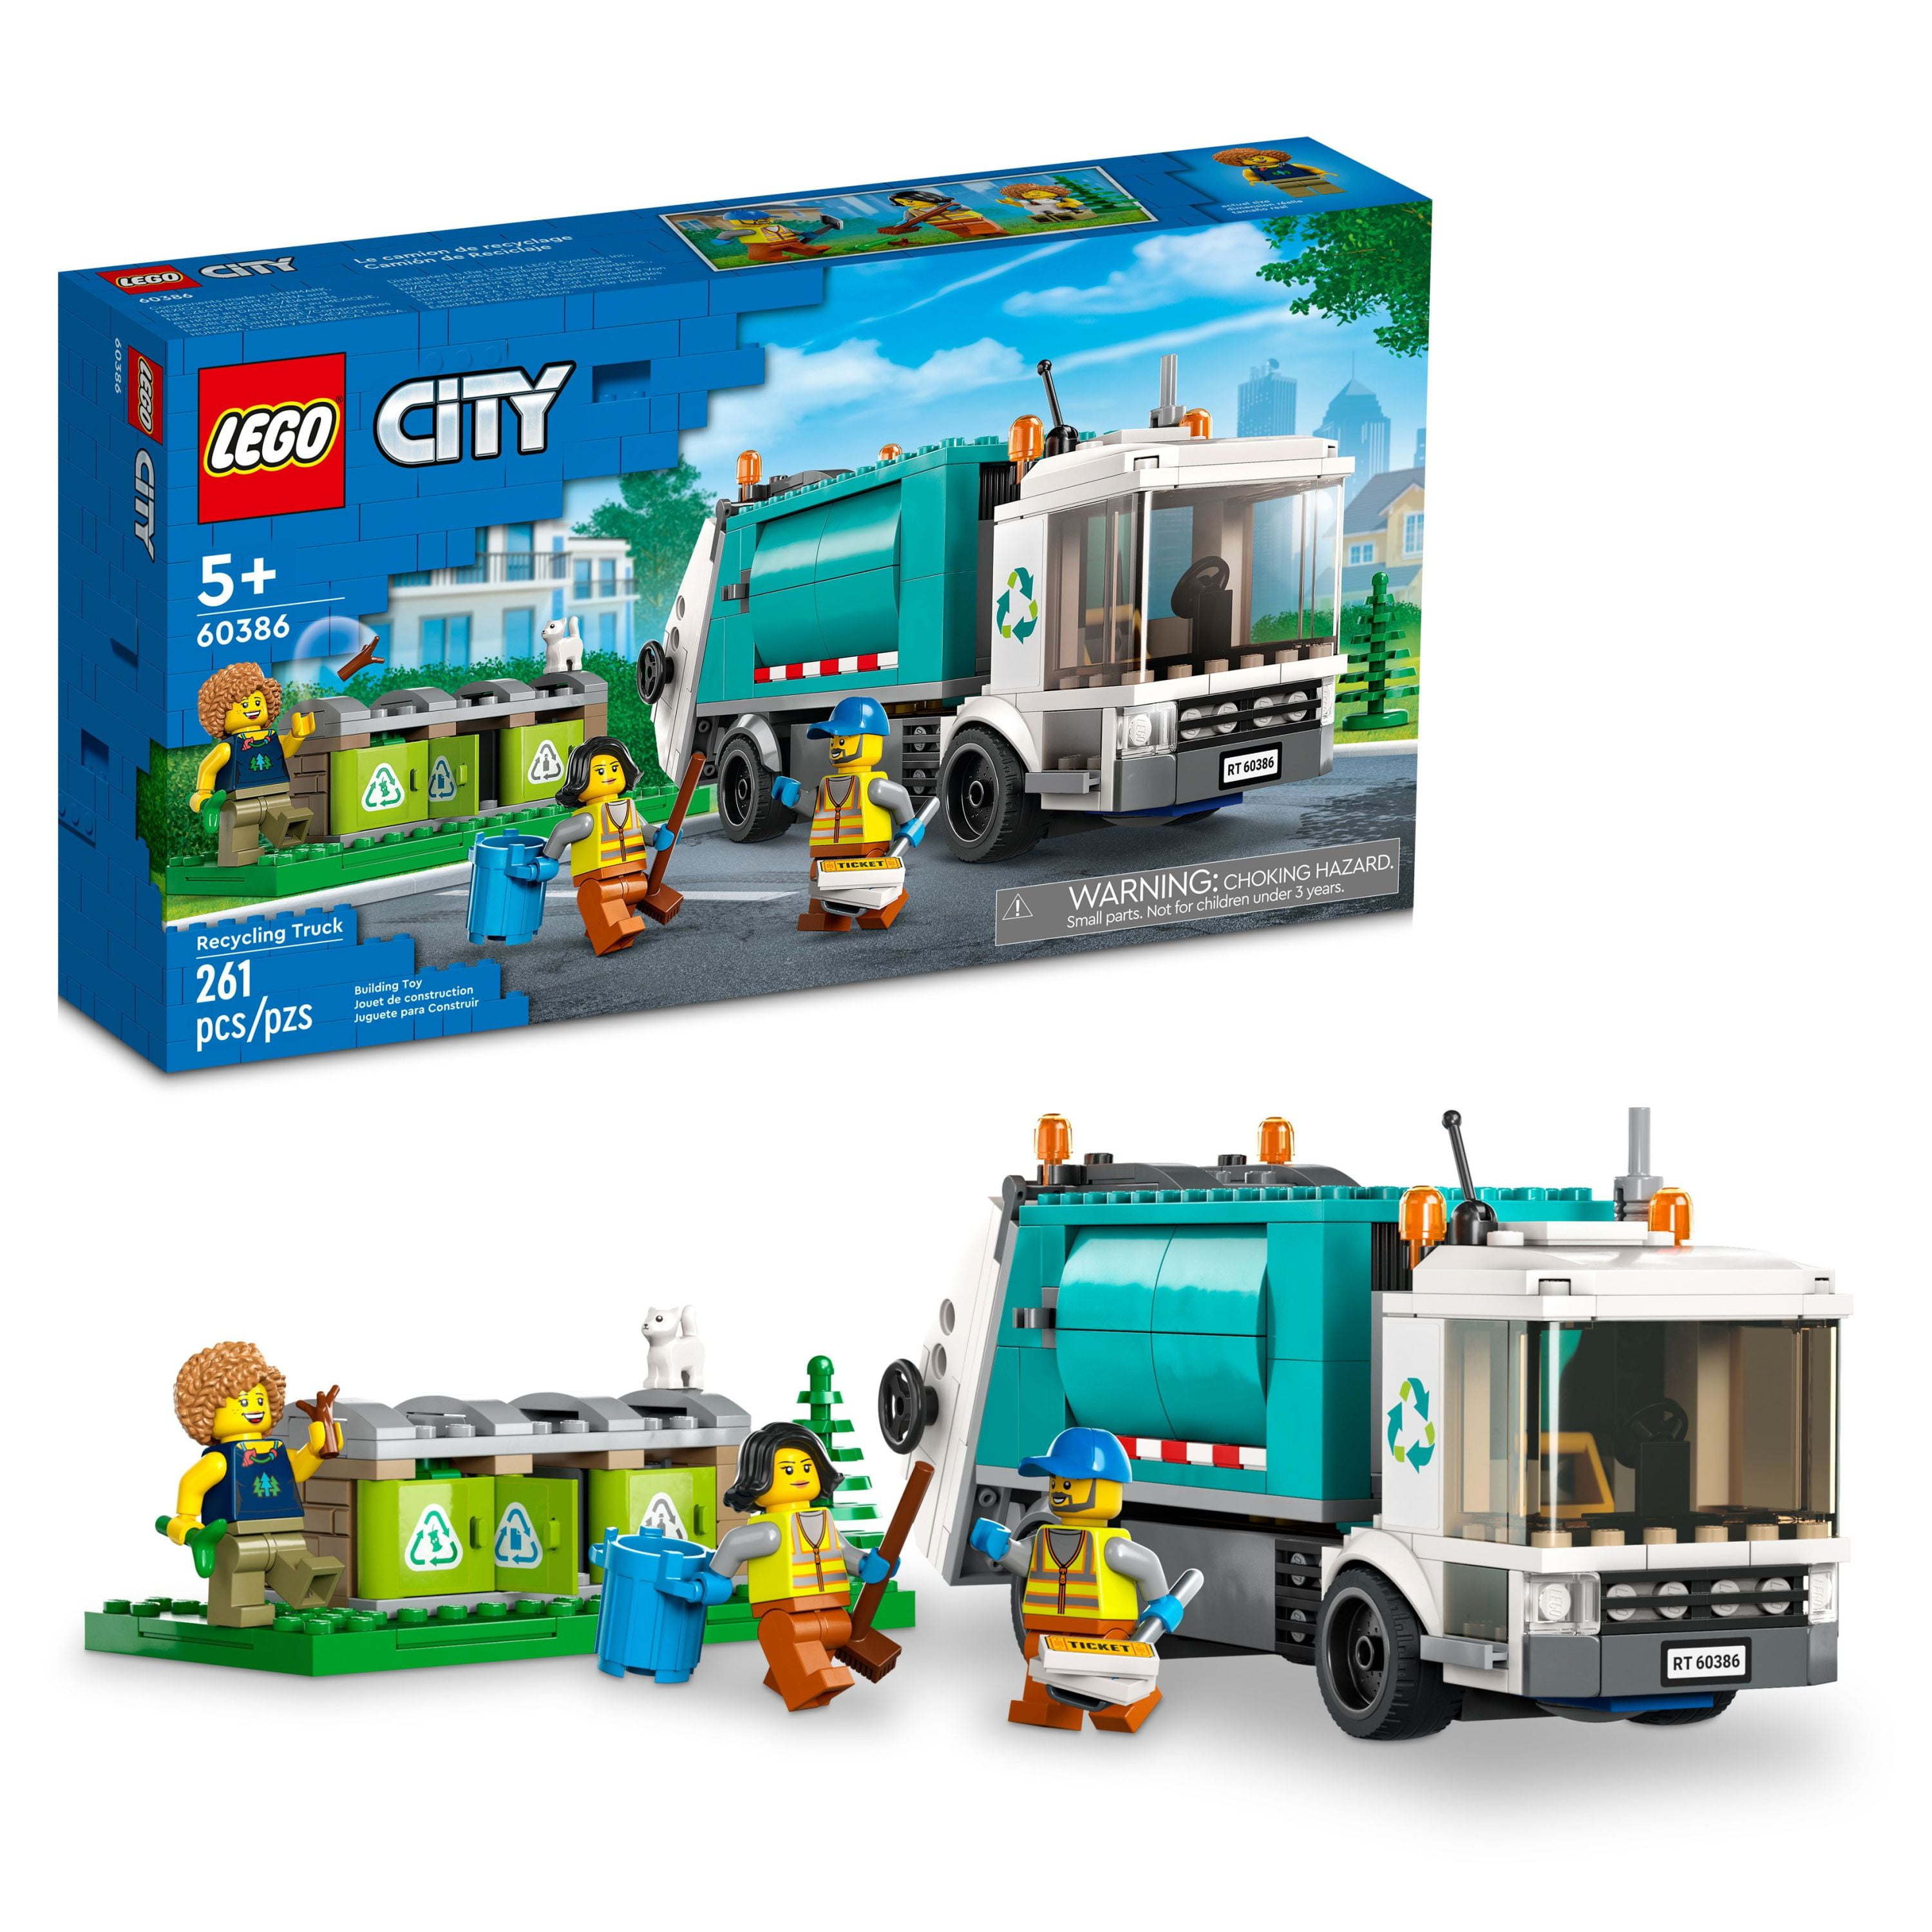 Lego Takes the Sustainable Route and You Should Too - Global Electronic  Services